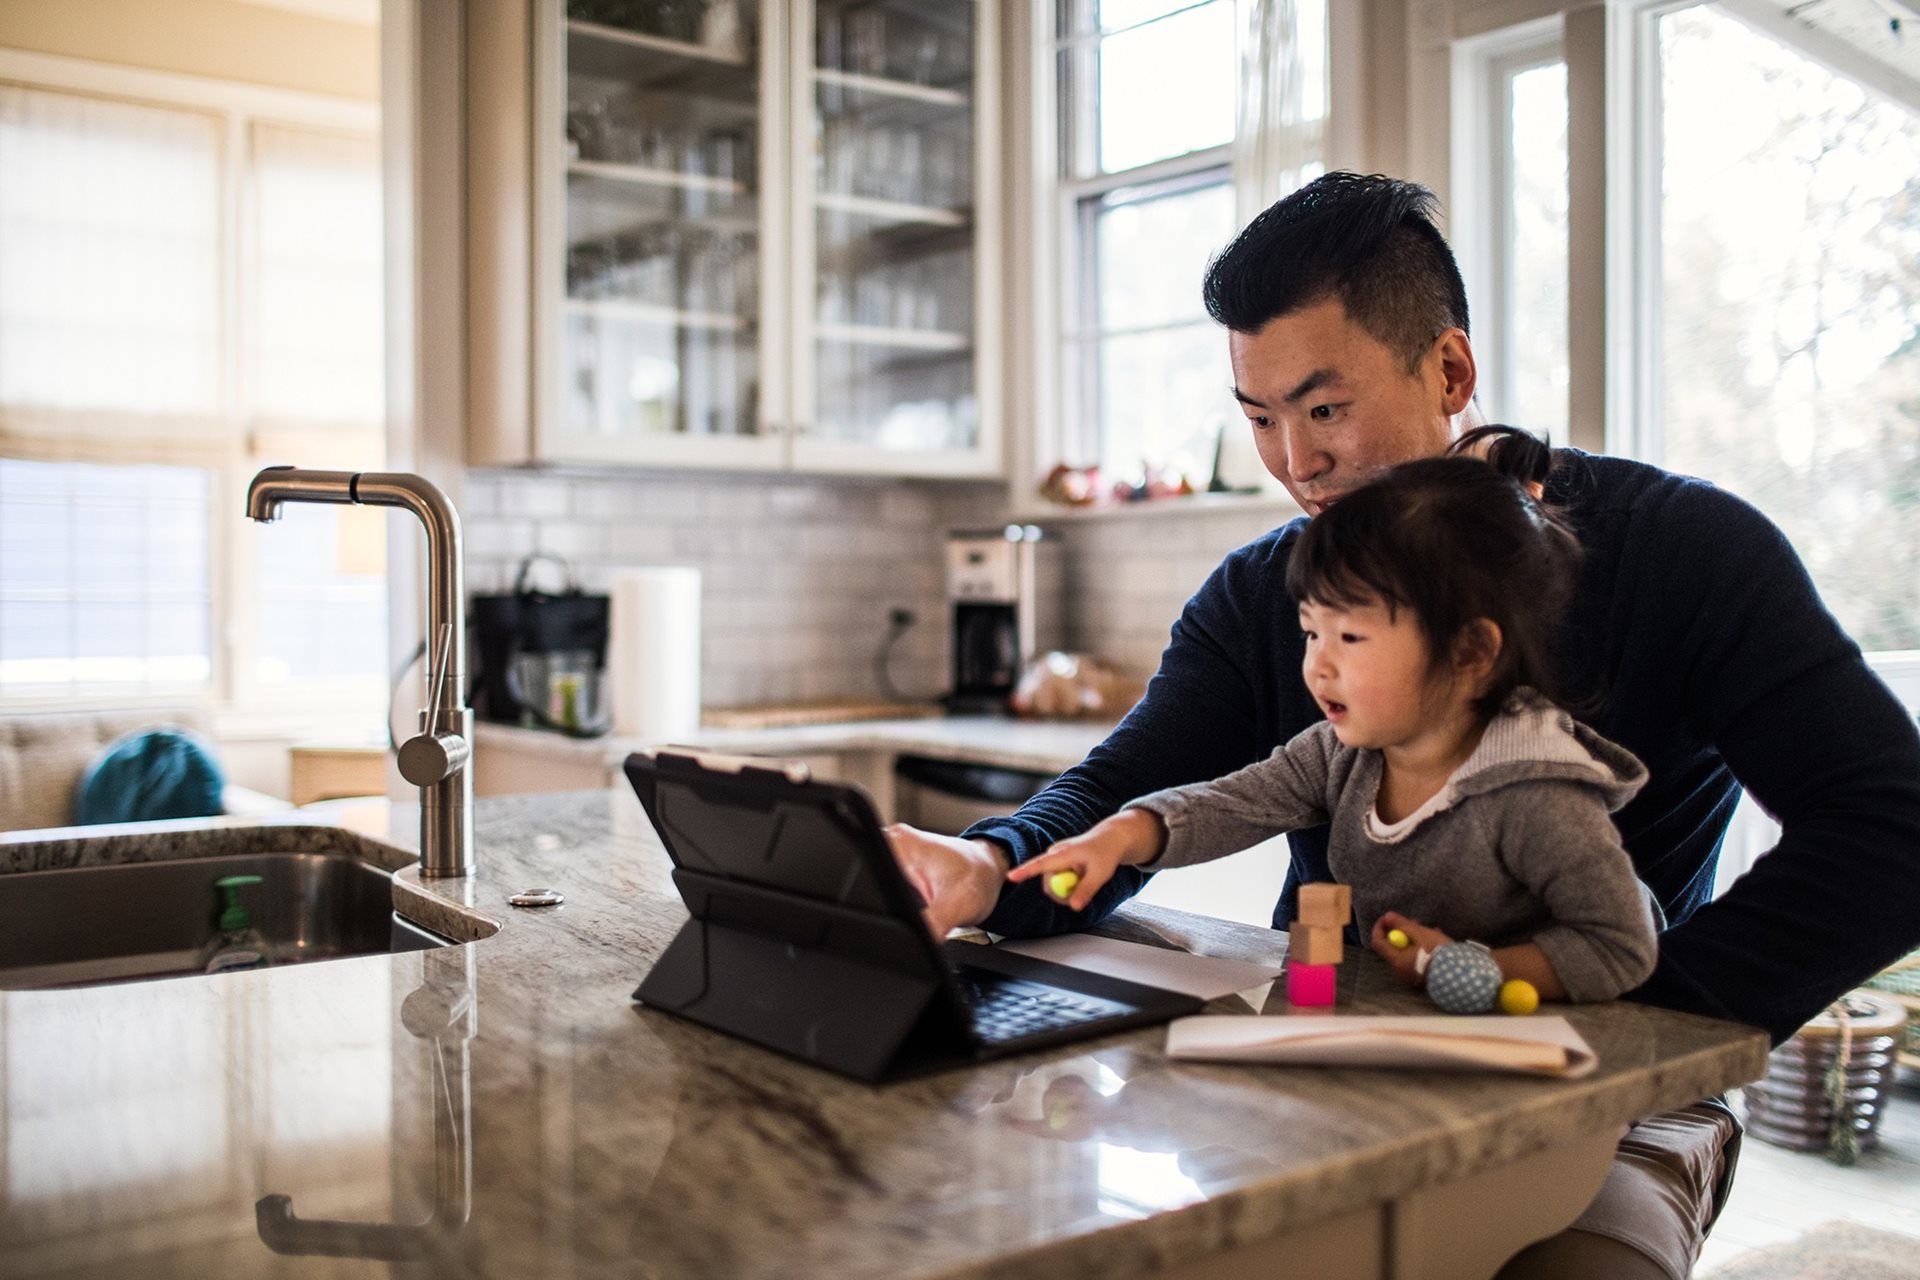 Father and child using tablet together in kitchen